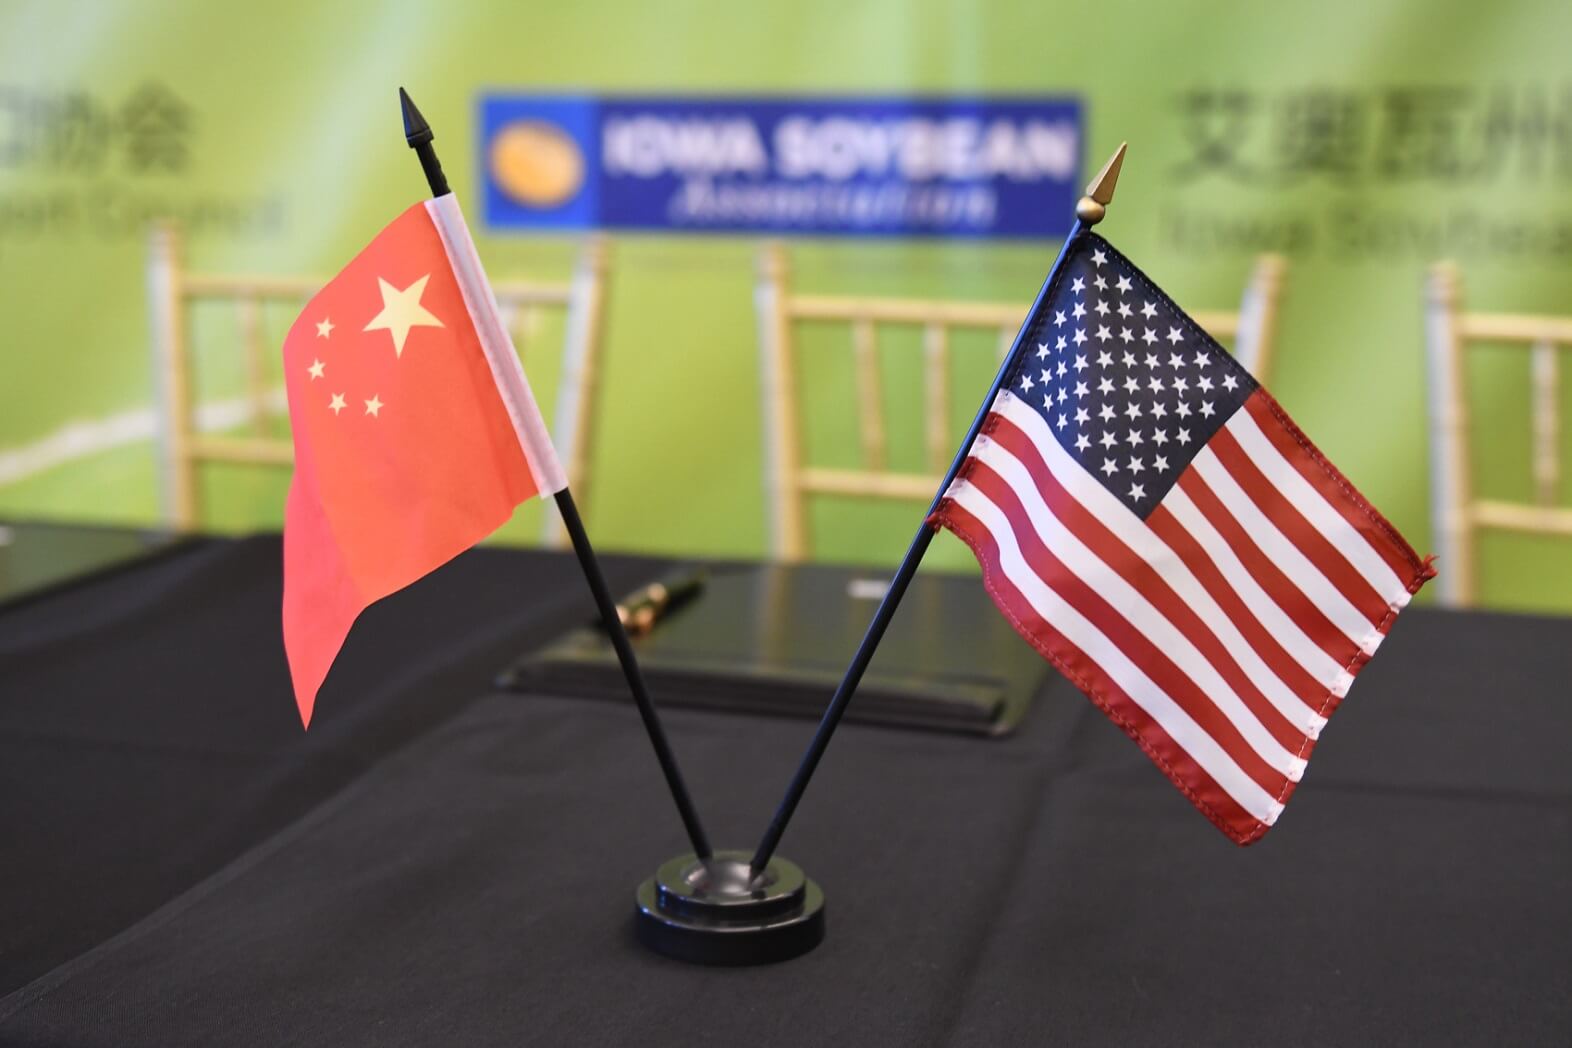 A Chinese flag next to the U.S. flag